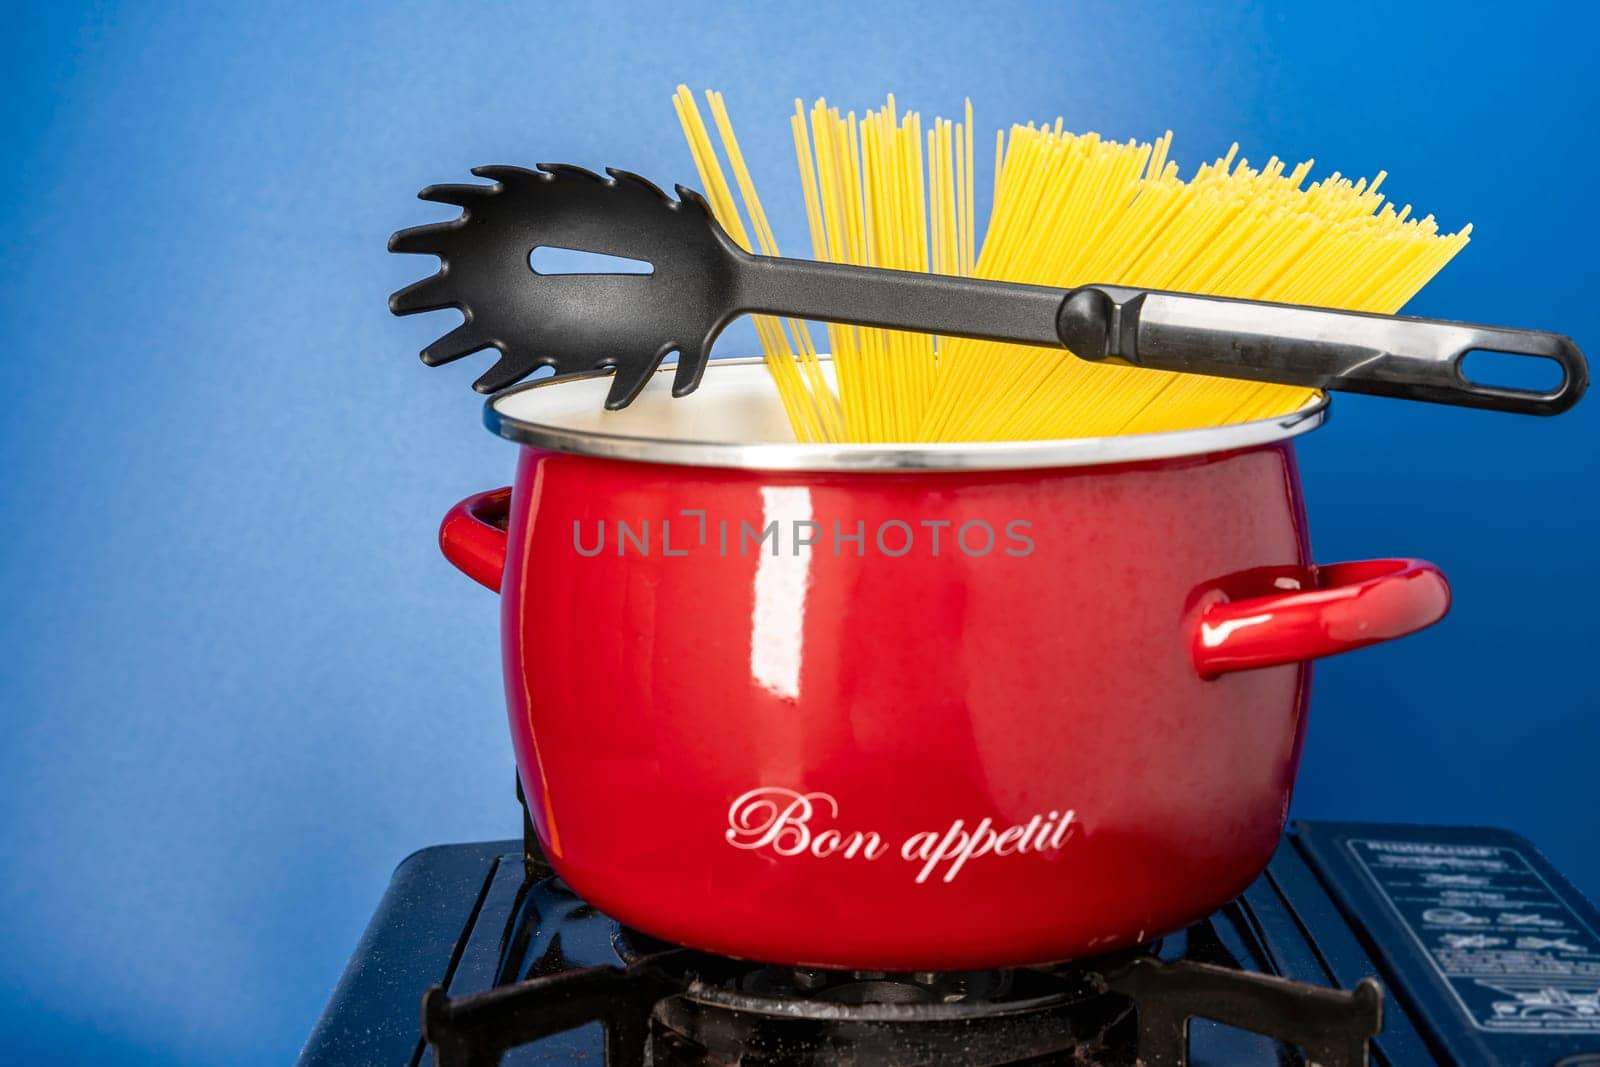 we cook ourselves. spaghetti in a saucepan. a beautiful red saucepan with spaghetti and skimmer. cooking spaghetti in a saucepan on a gas stove. homemade Italian-style dinner. kitchen saucepan on a blue background